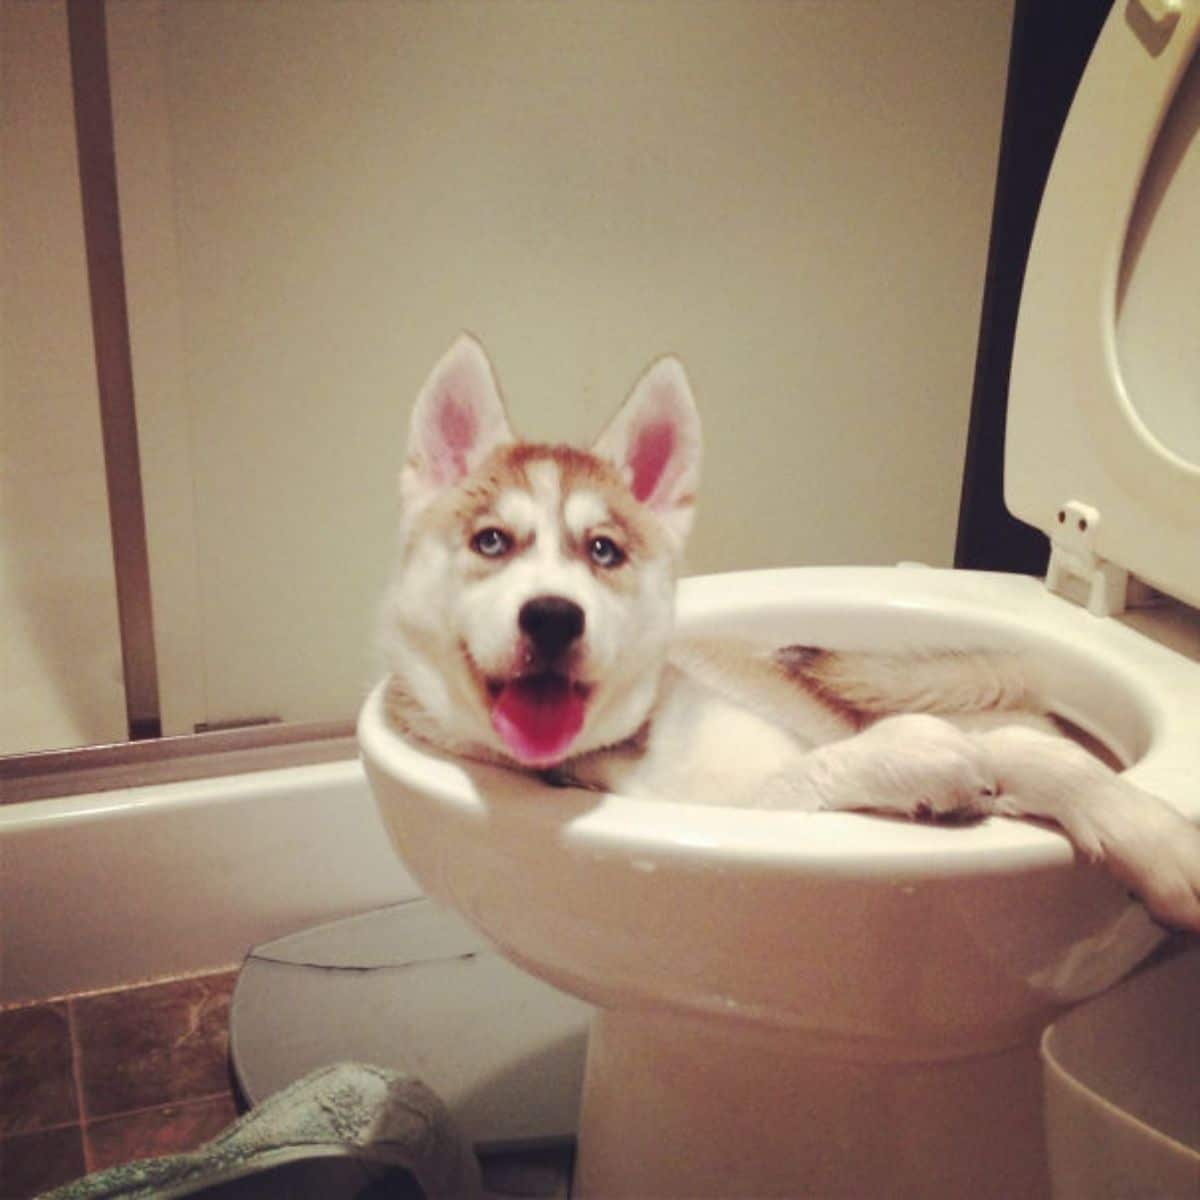 brown and white husky puppy laying in a white toilet bowl